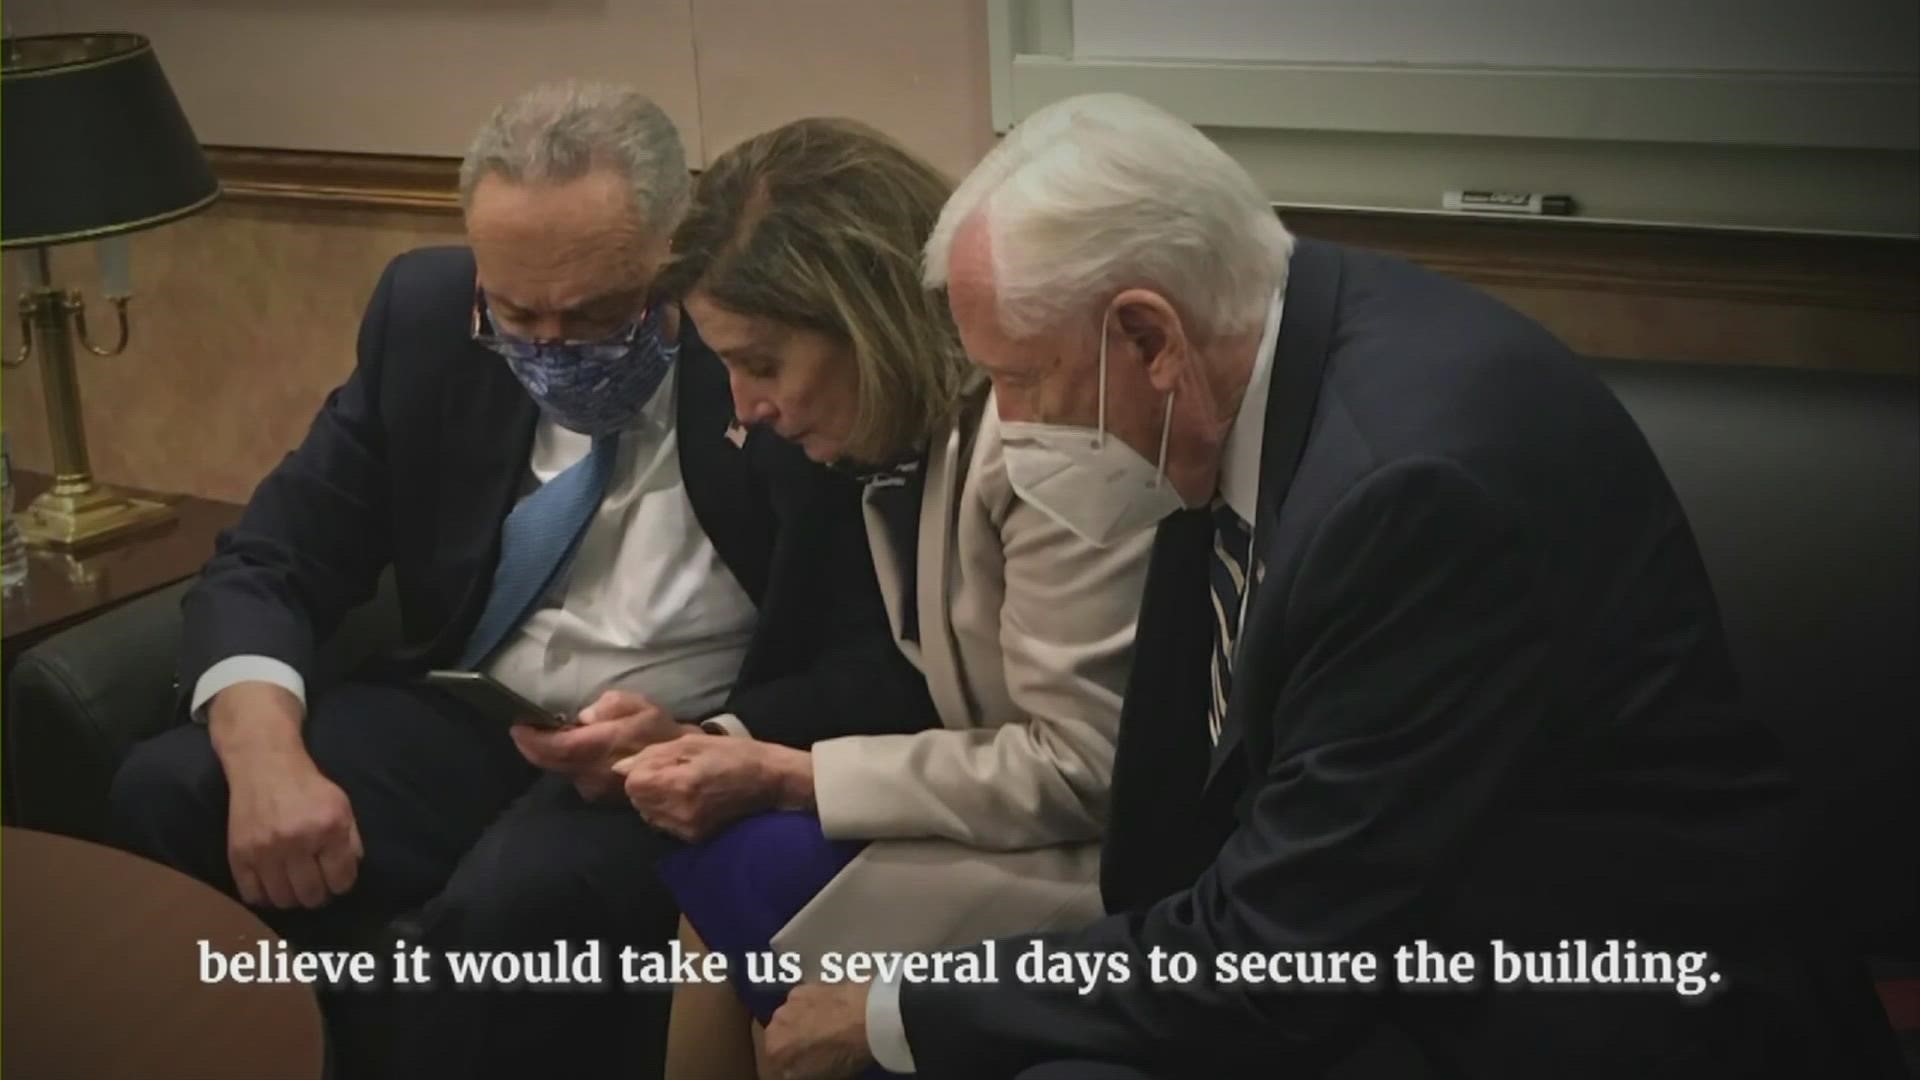 During the call, Sens. Mitch McConnell and Chuck Schumer and House Speaker Nancy Pelosi urged the defense secretary to secure the Capitol as soon as possible.